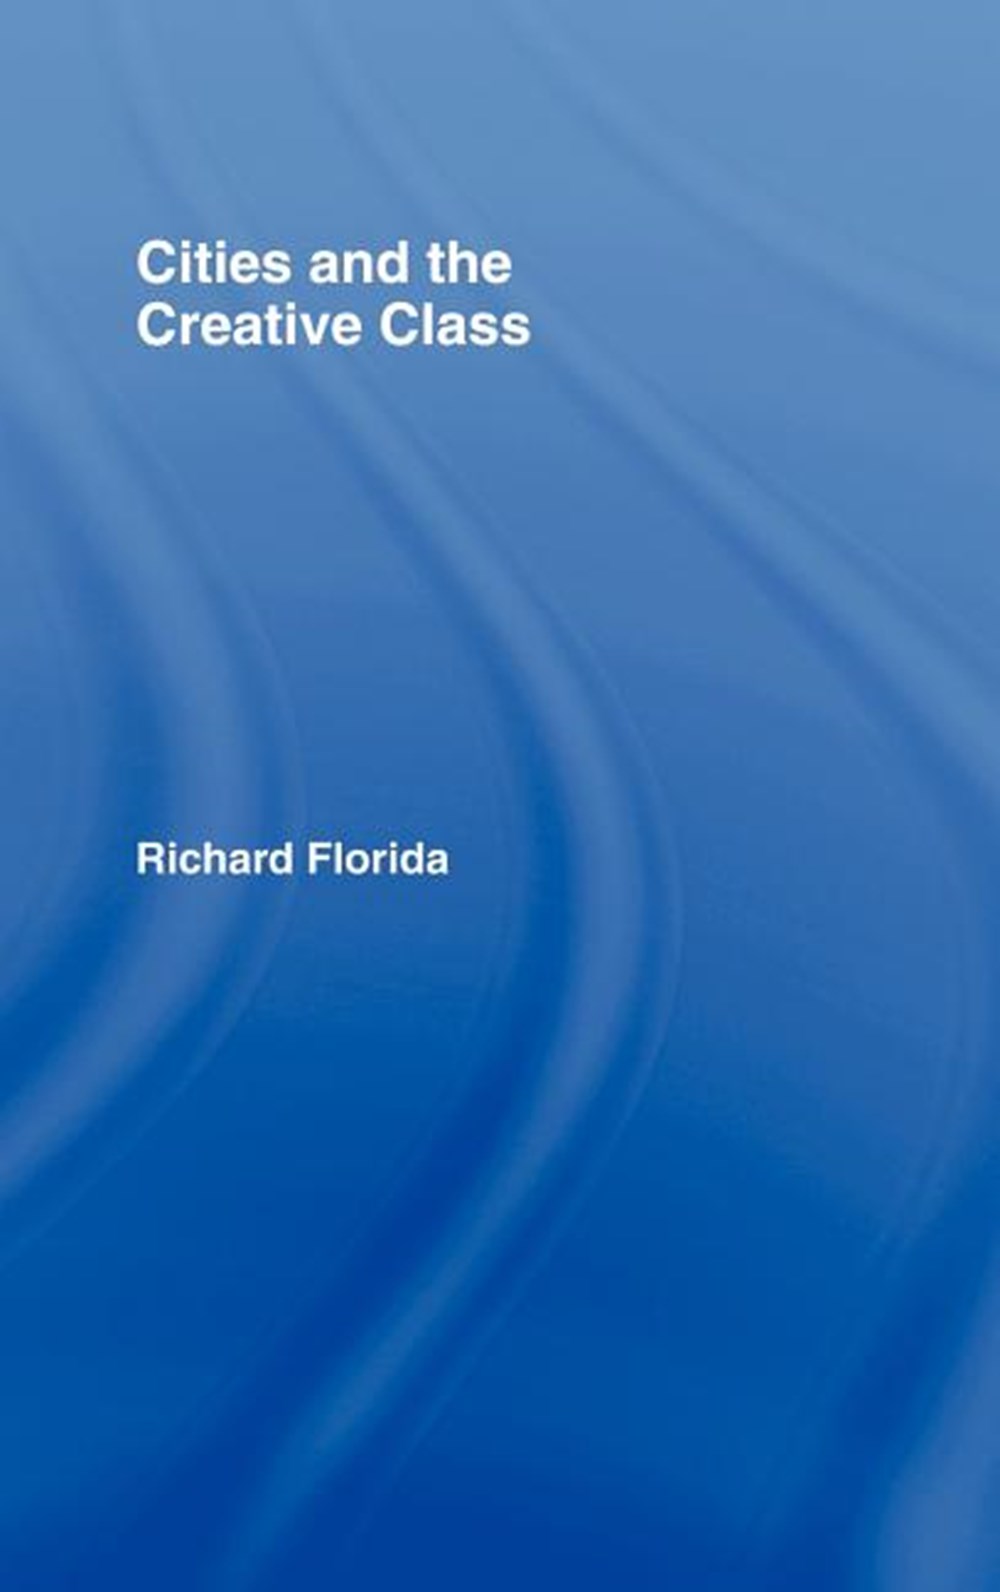 Cities and the Creative Class